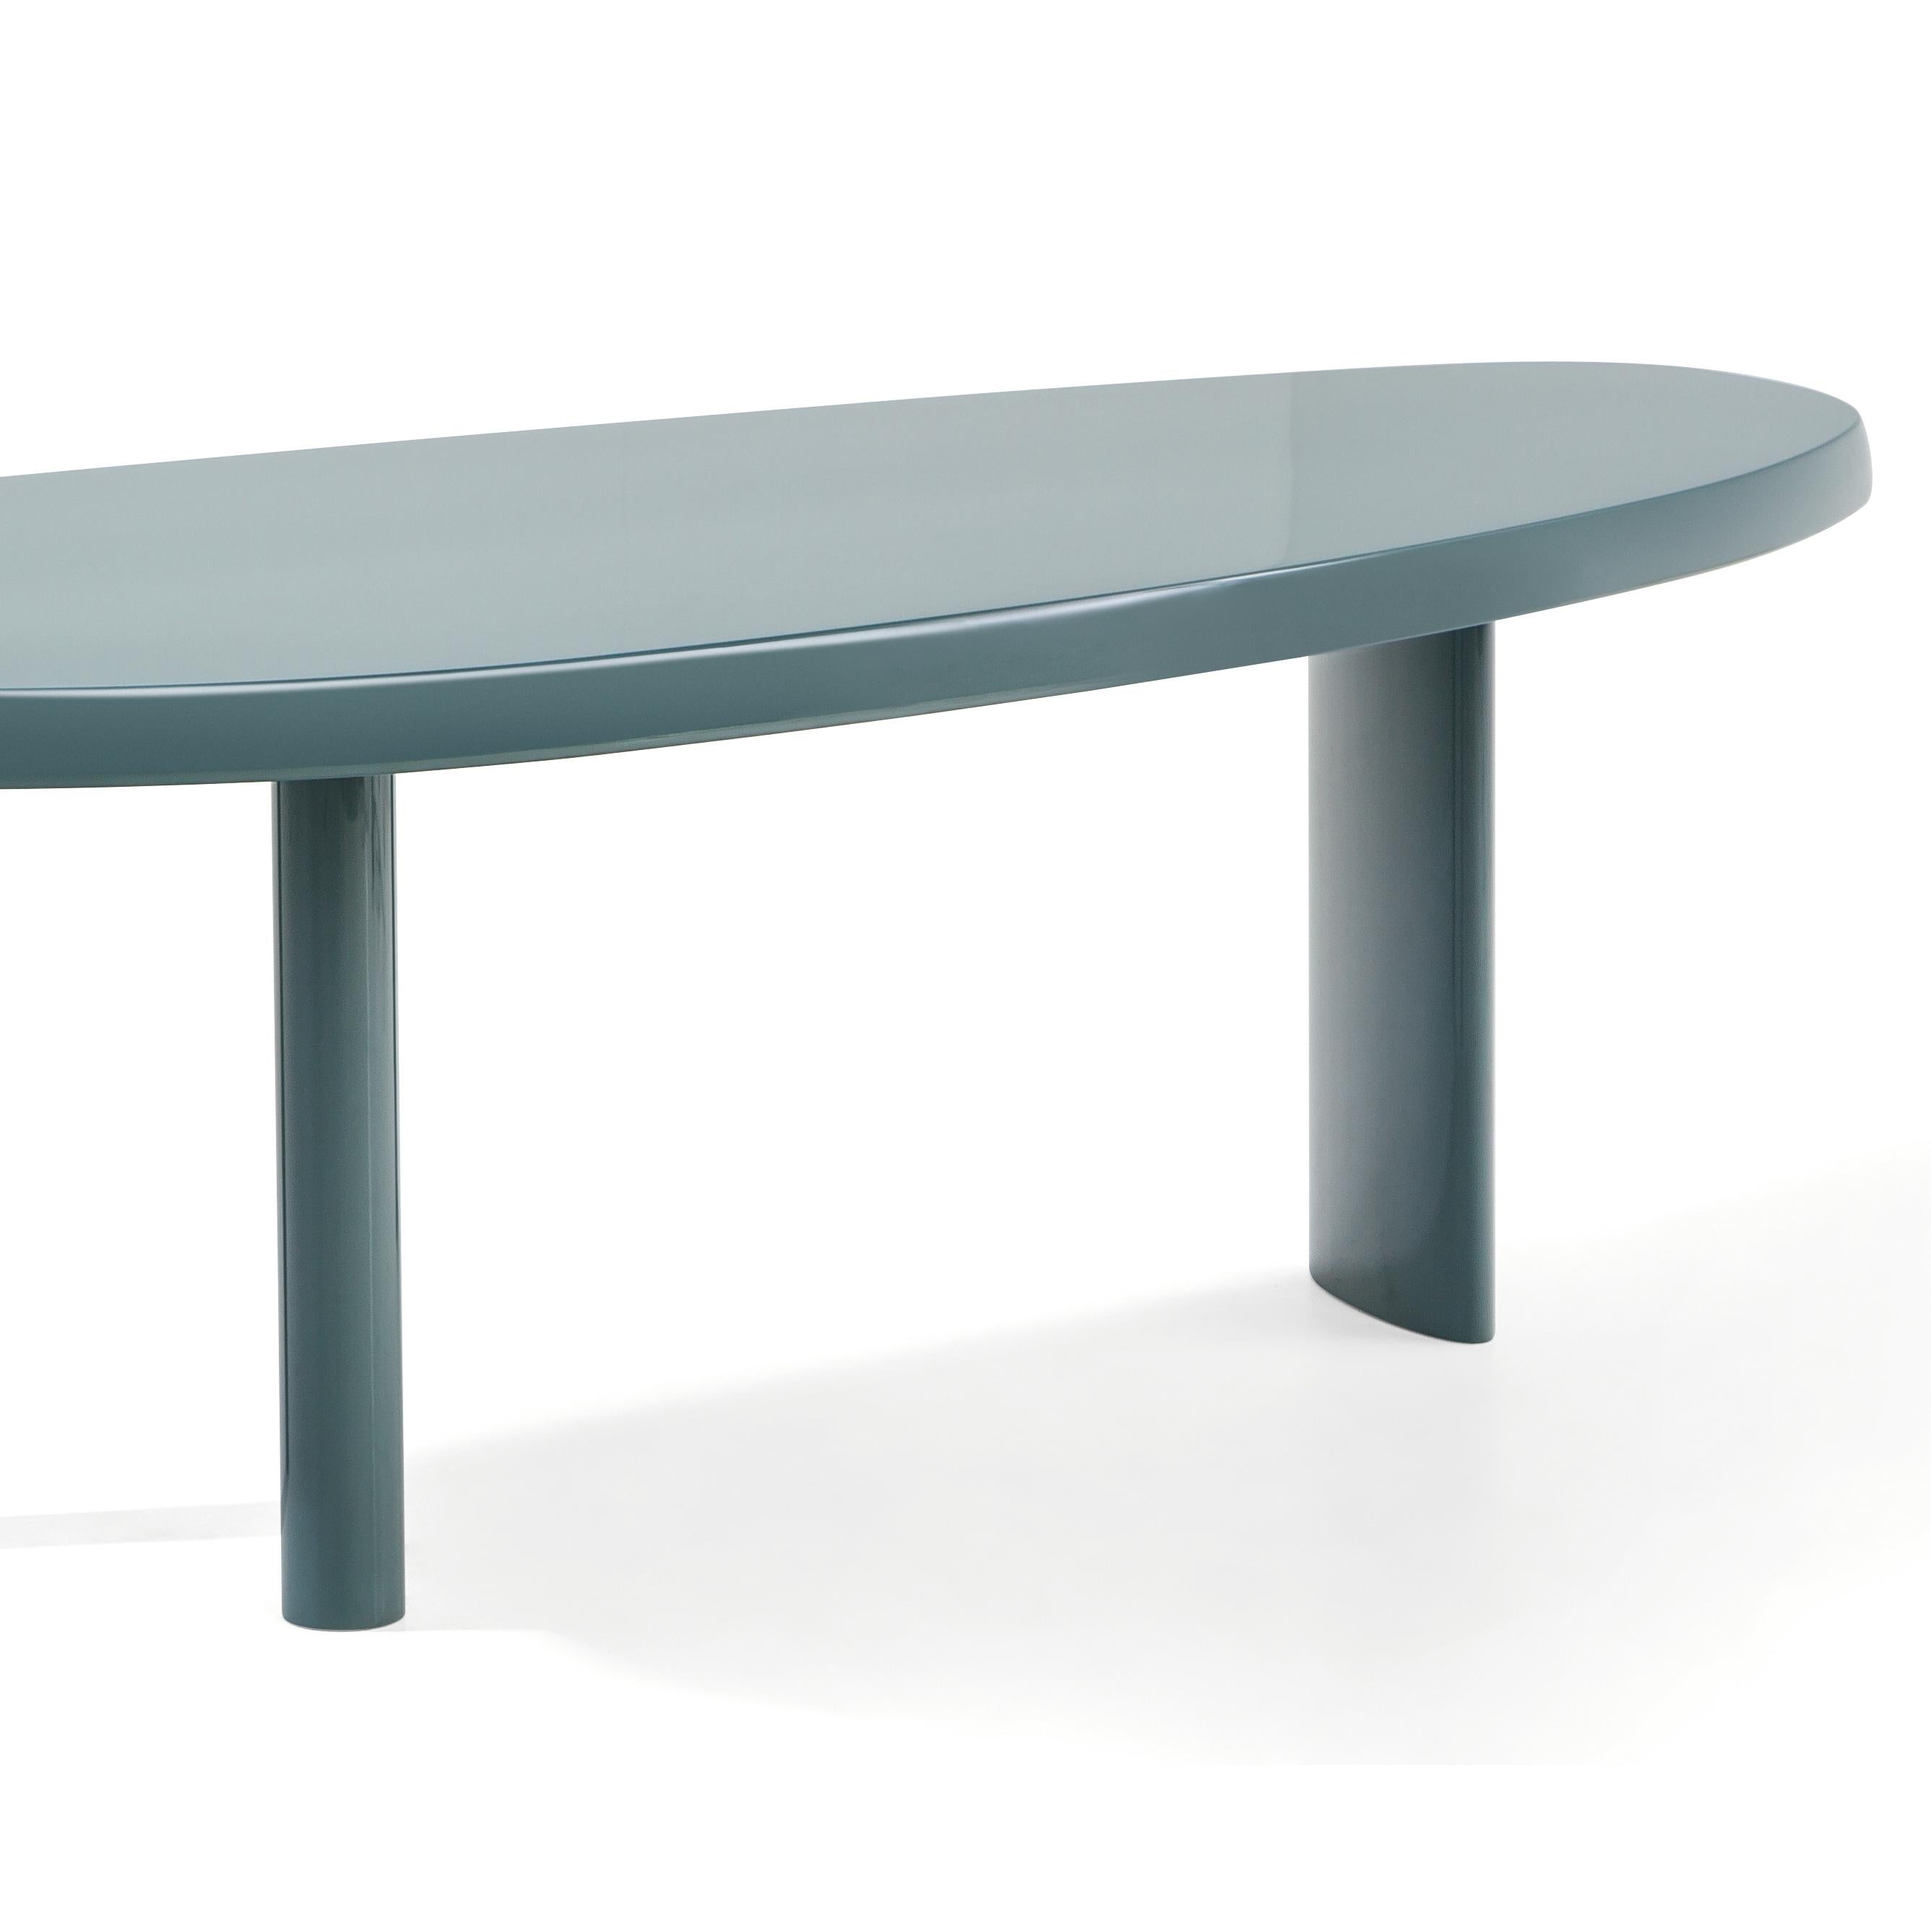 Sage green Forme Libre table designed by Charlotte Perriand in 1959. Relaunched by Cassina in 2011.
Manufactured by Cassina in Italy.

Charlotte Perriand started work on the tables en forme libre in 1938. Originally intended for her own atelier